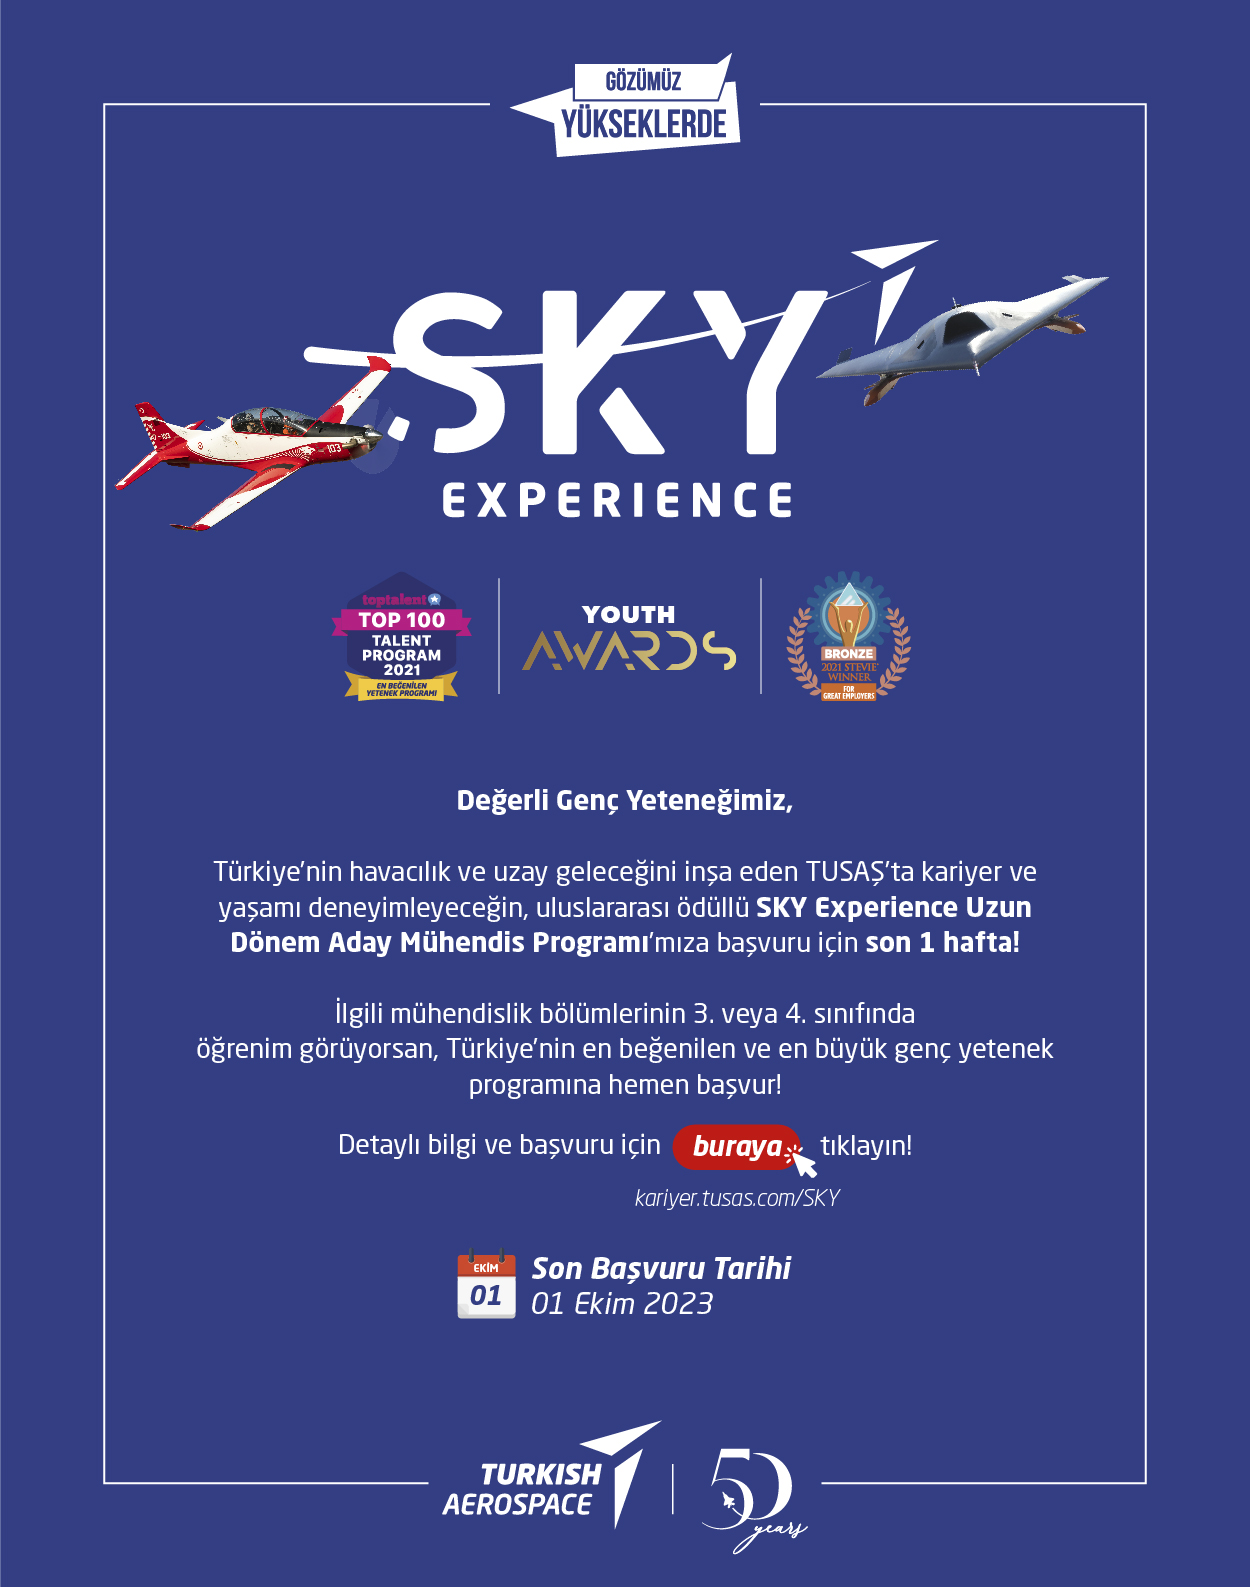 SKY Experience Long-Term Candidate Engineer Program Application Period Ends!